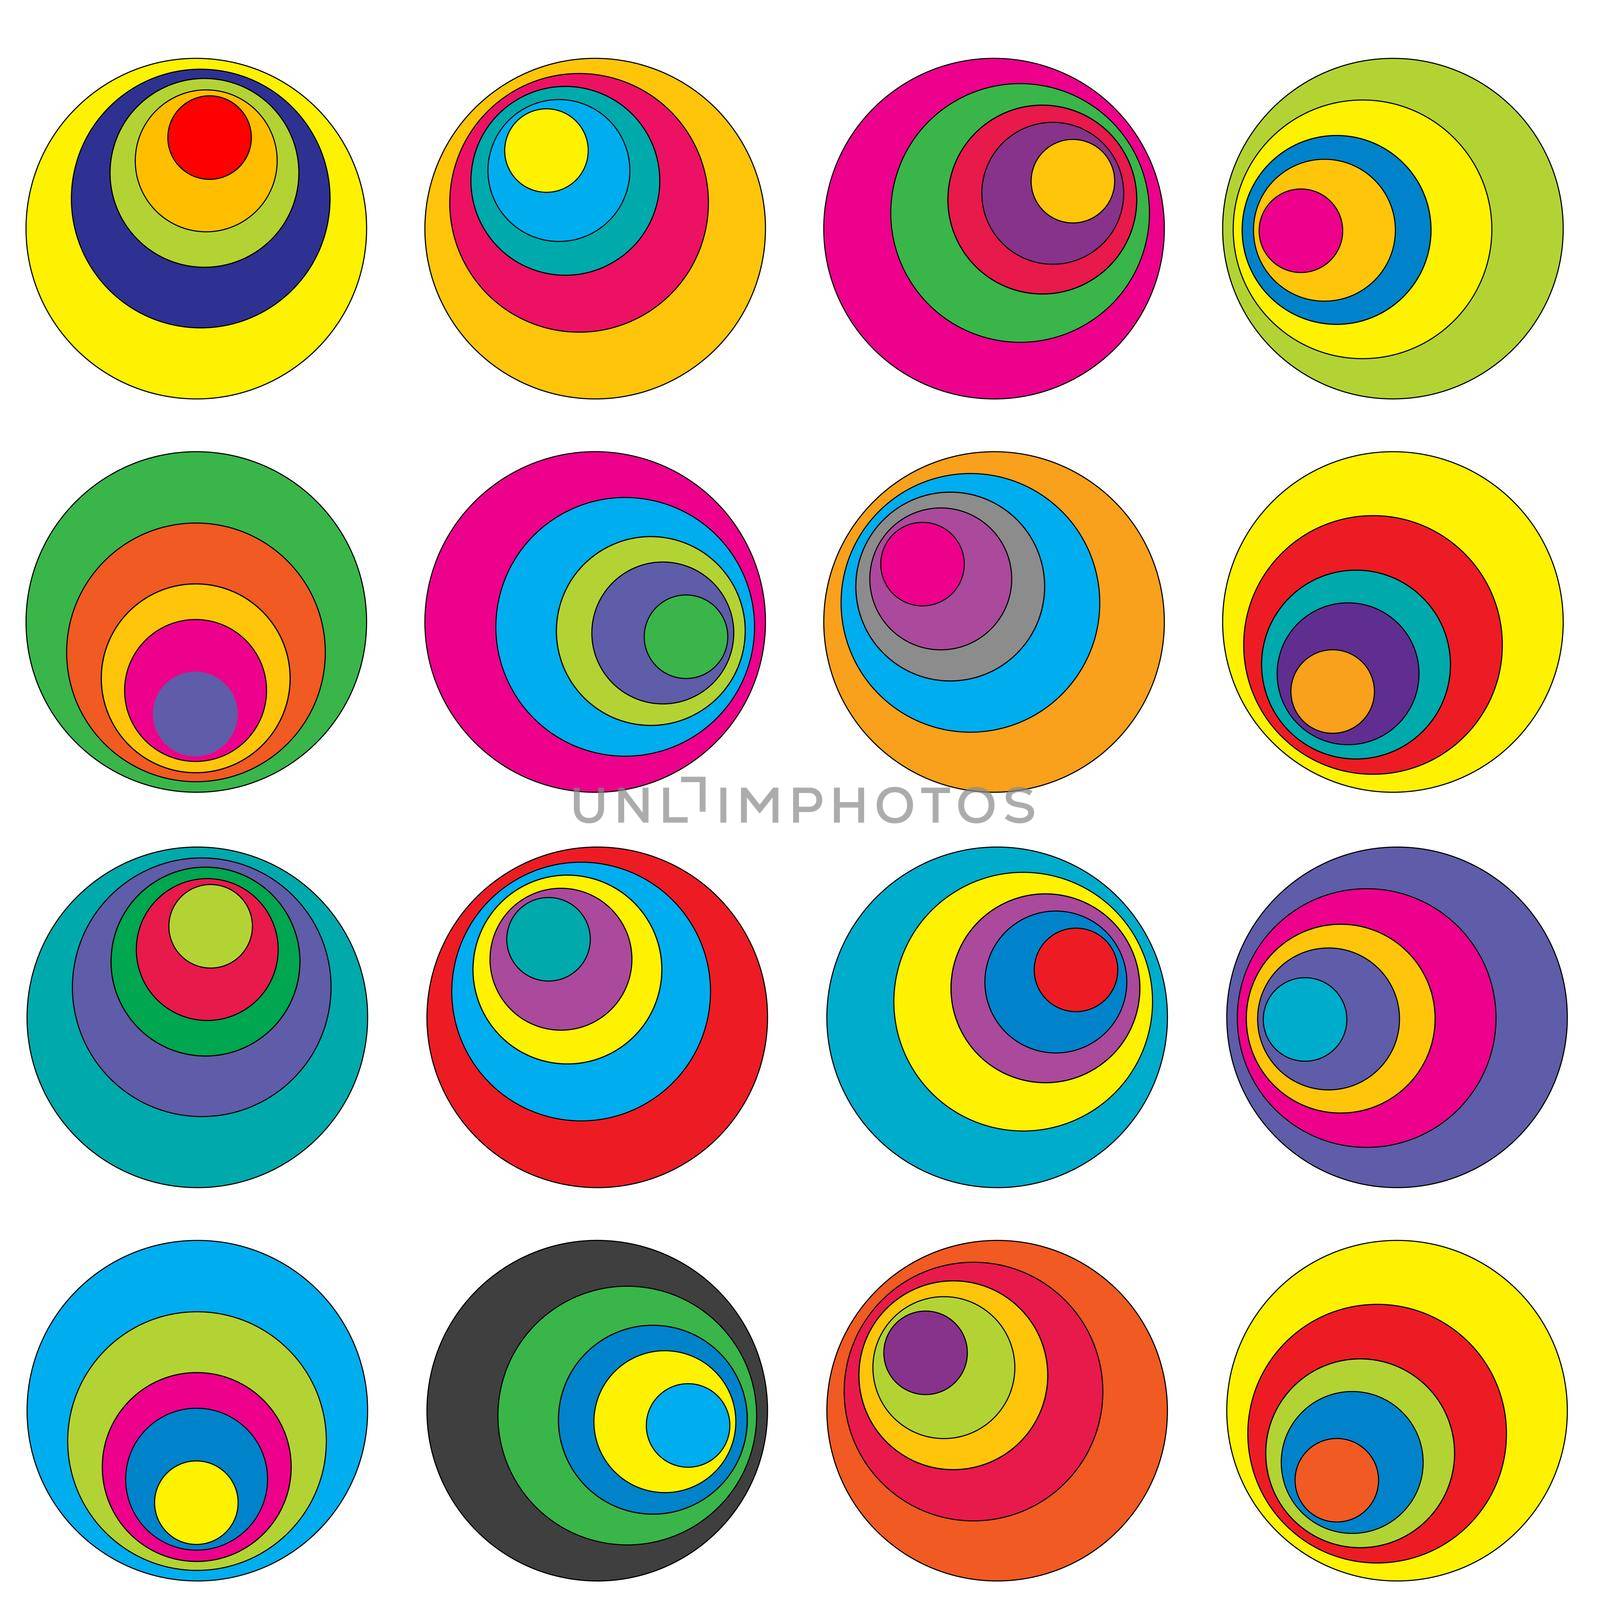 Abstract geometrical background with colorful circles by hibrida13